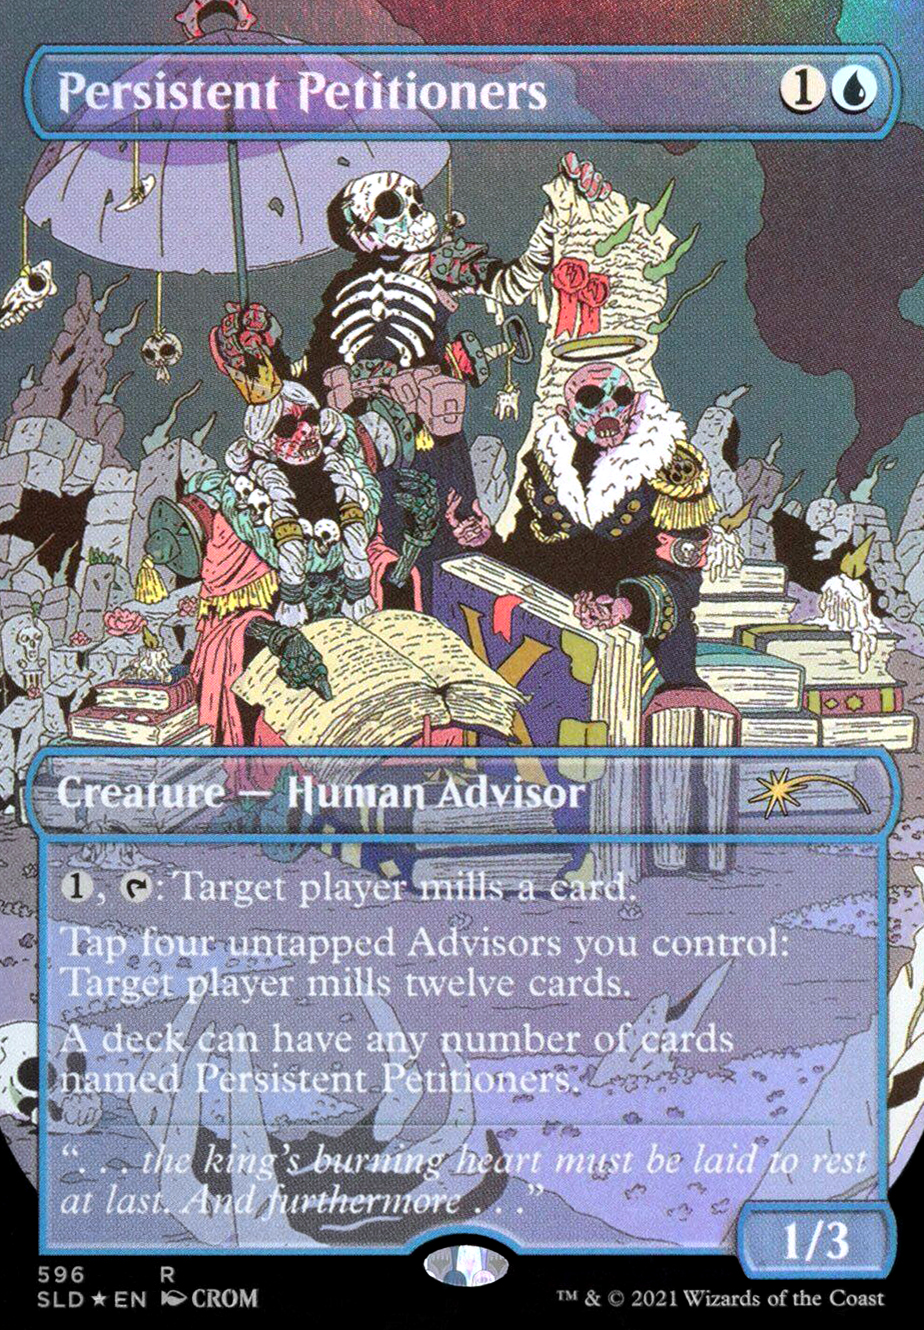 Featured card: Persistent Petitioners